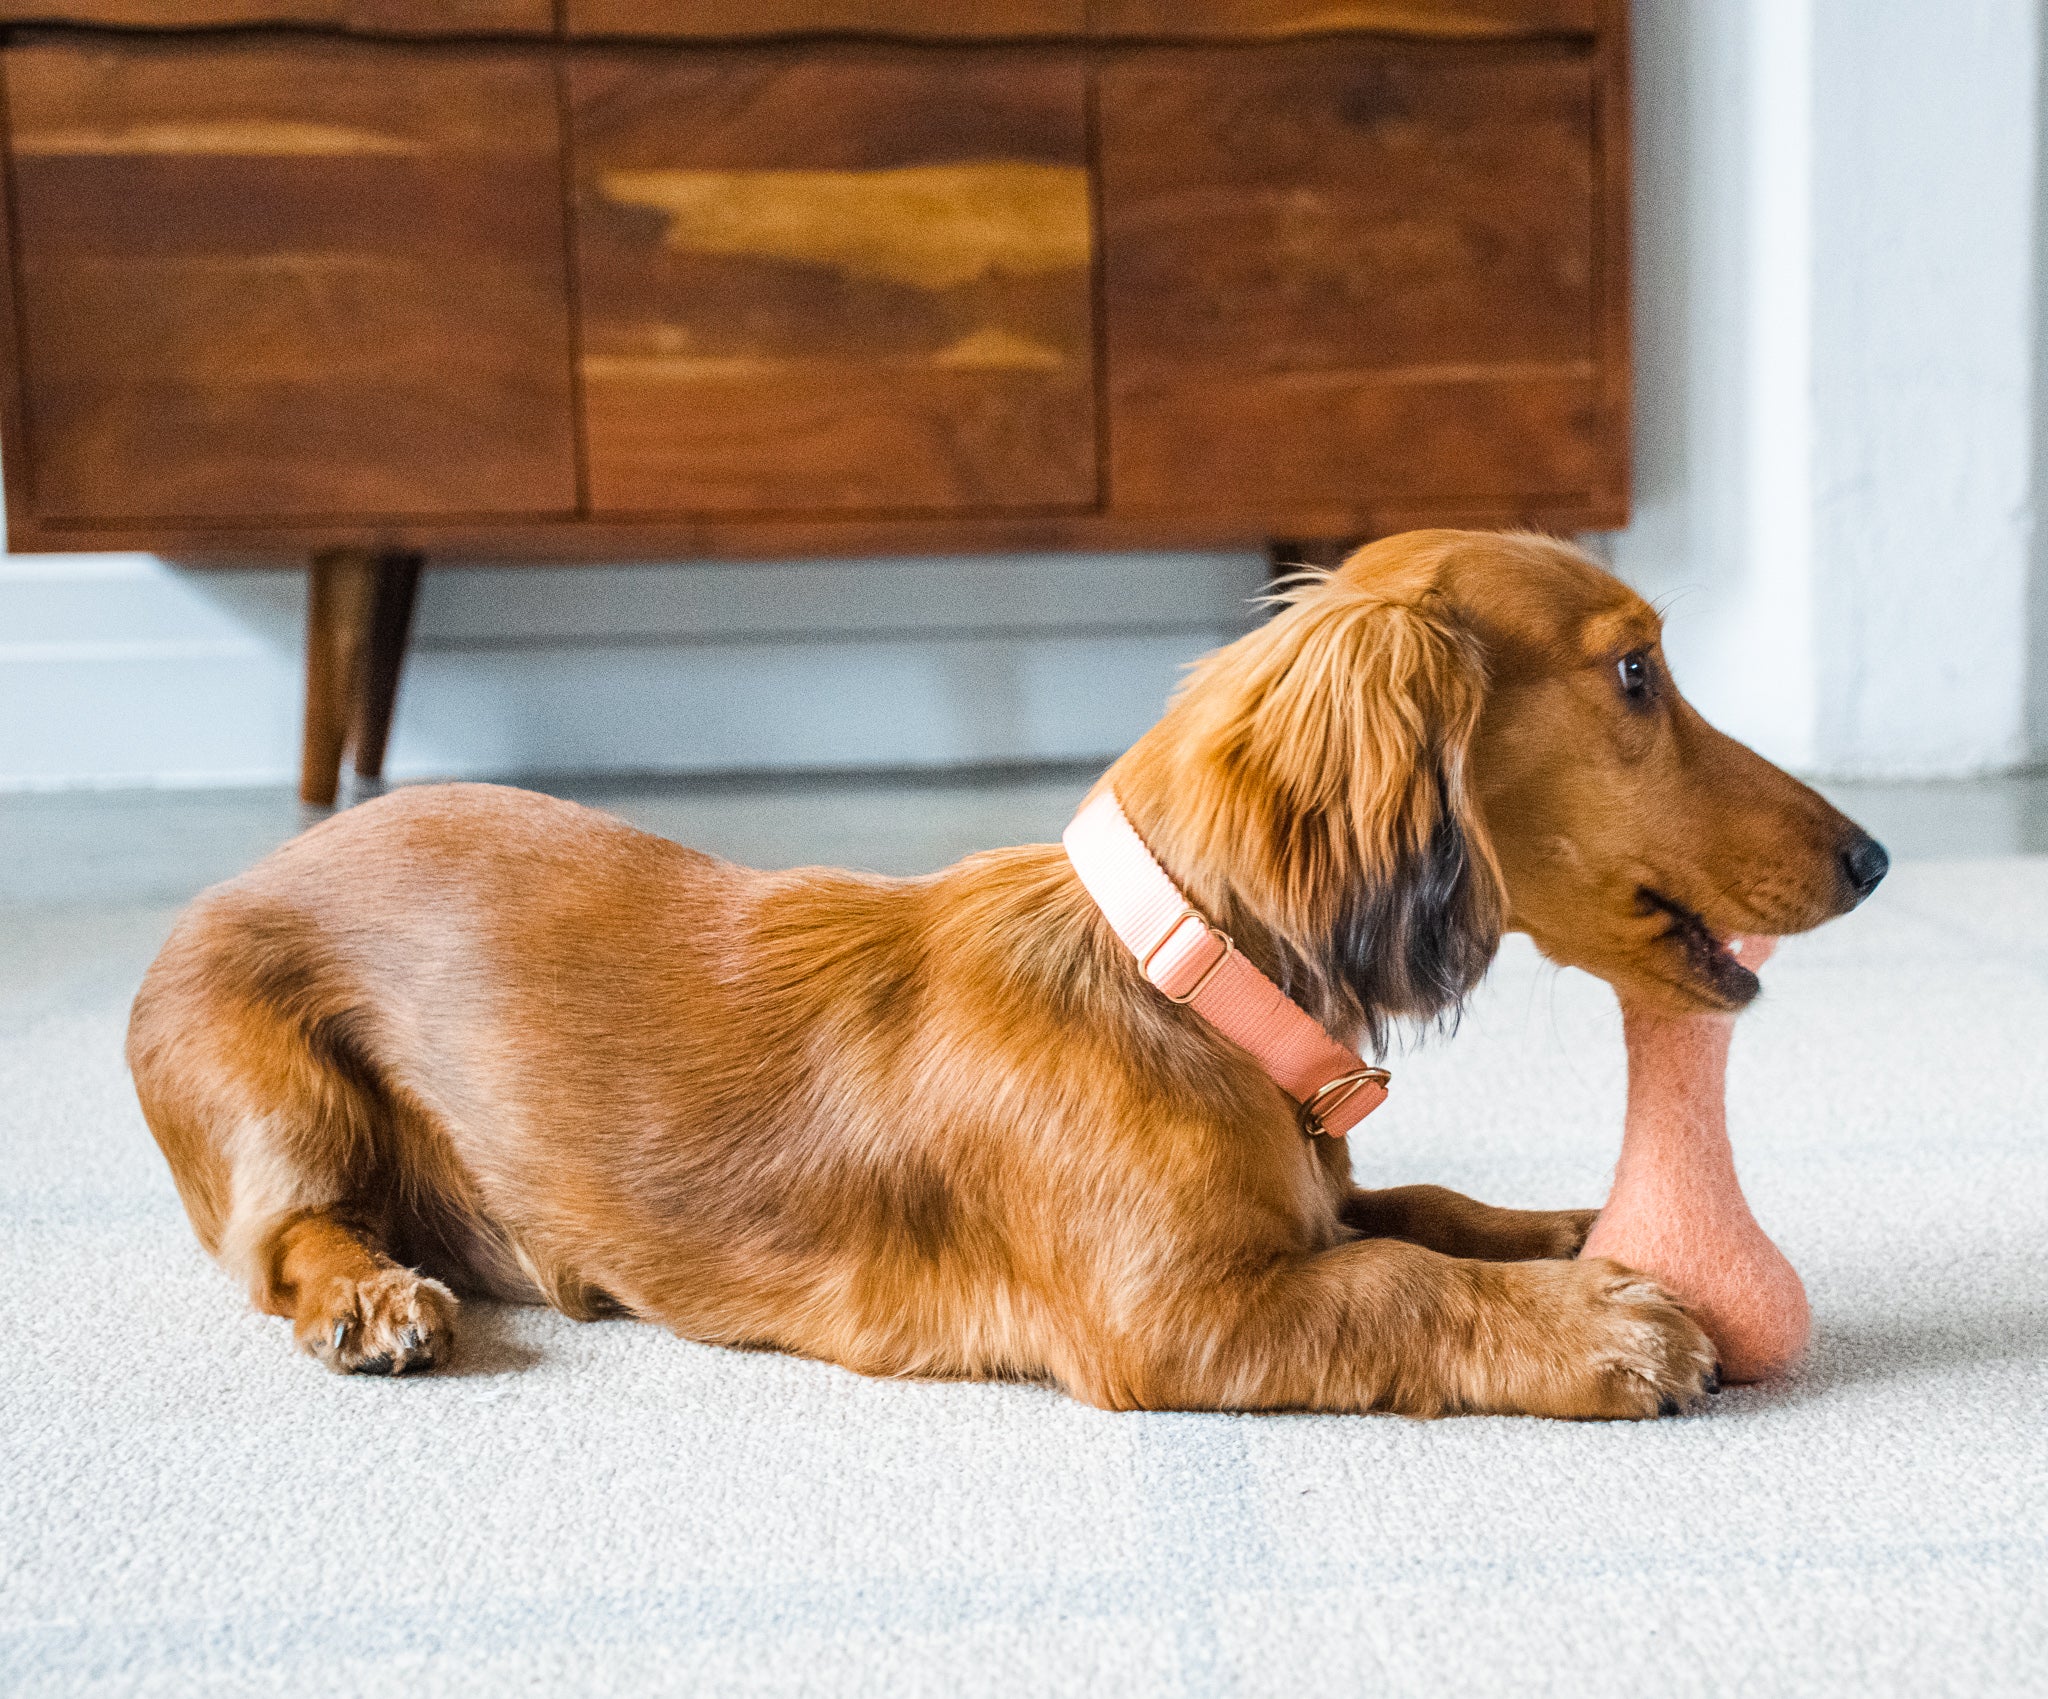 Miniature dachshund wearing a peach colored collar lays on floor and chew organic sheep's wool bone toy. 